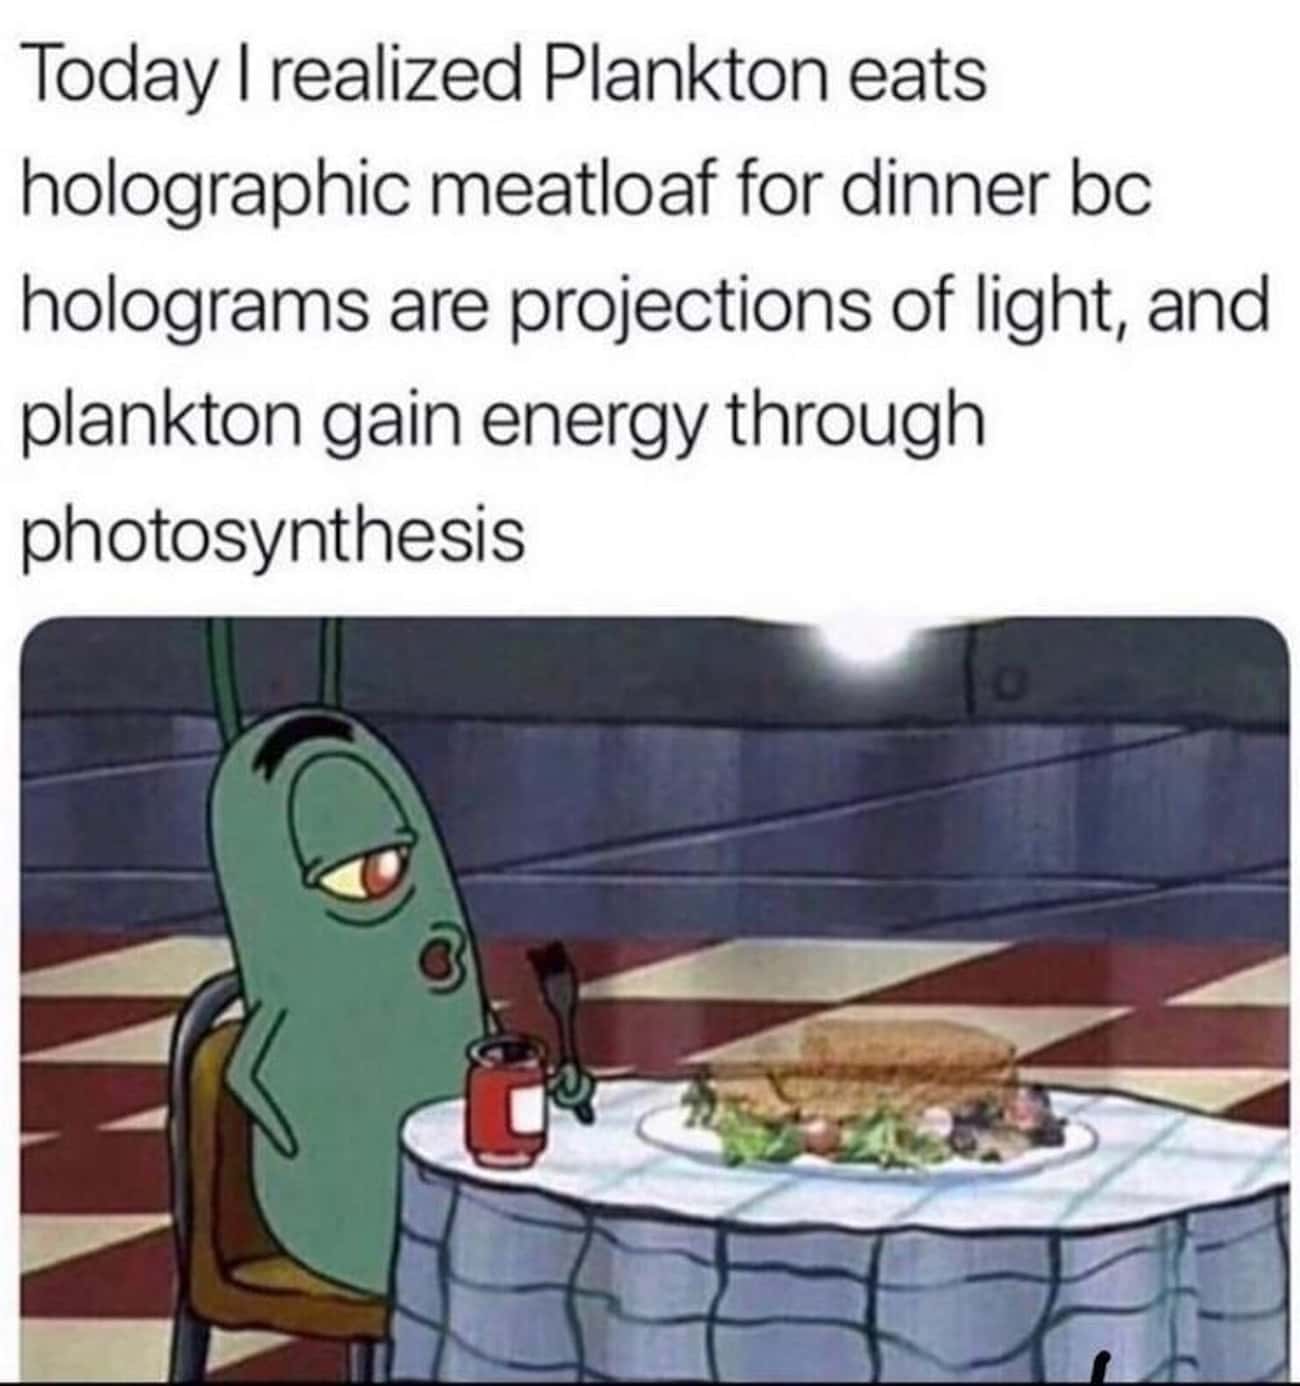 There's A Reason Plankton Eats Holographic Meatloaf